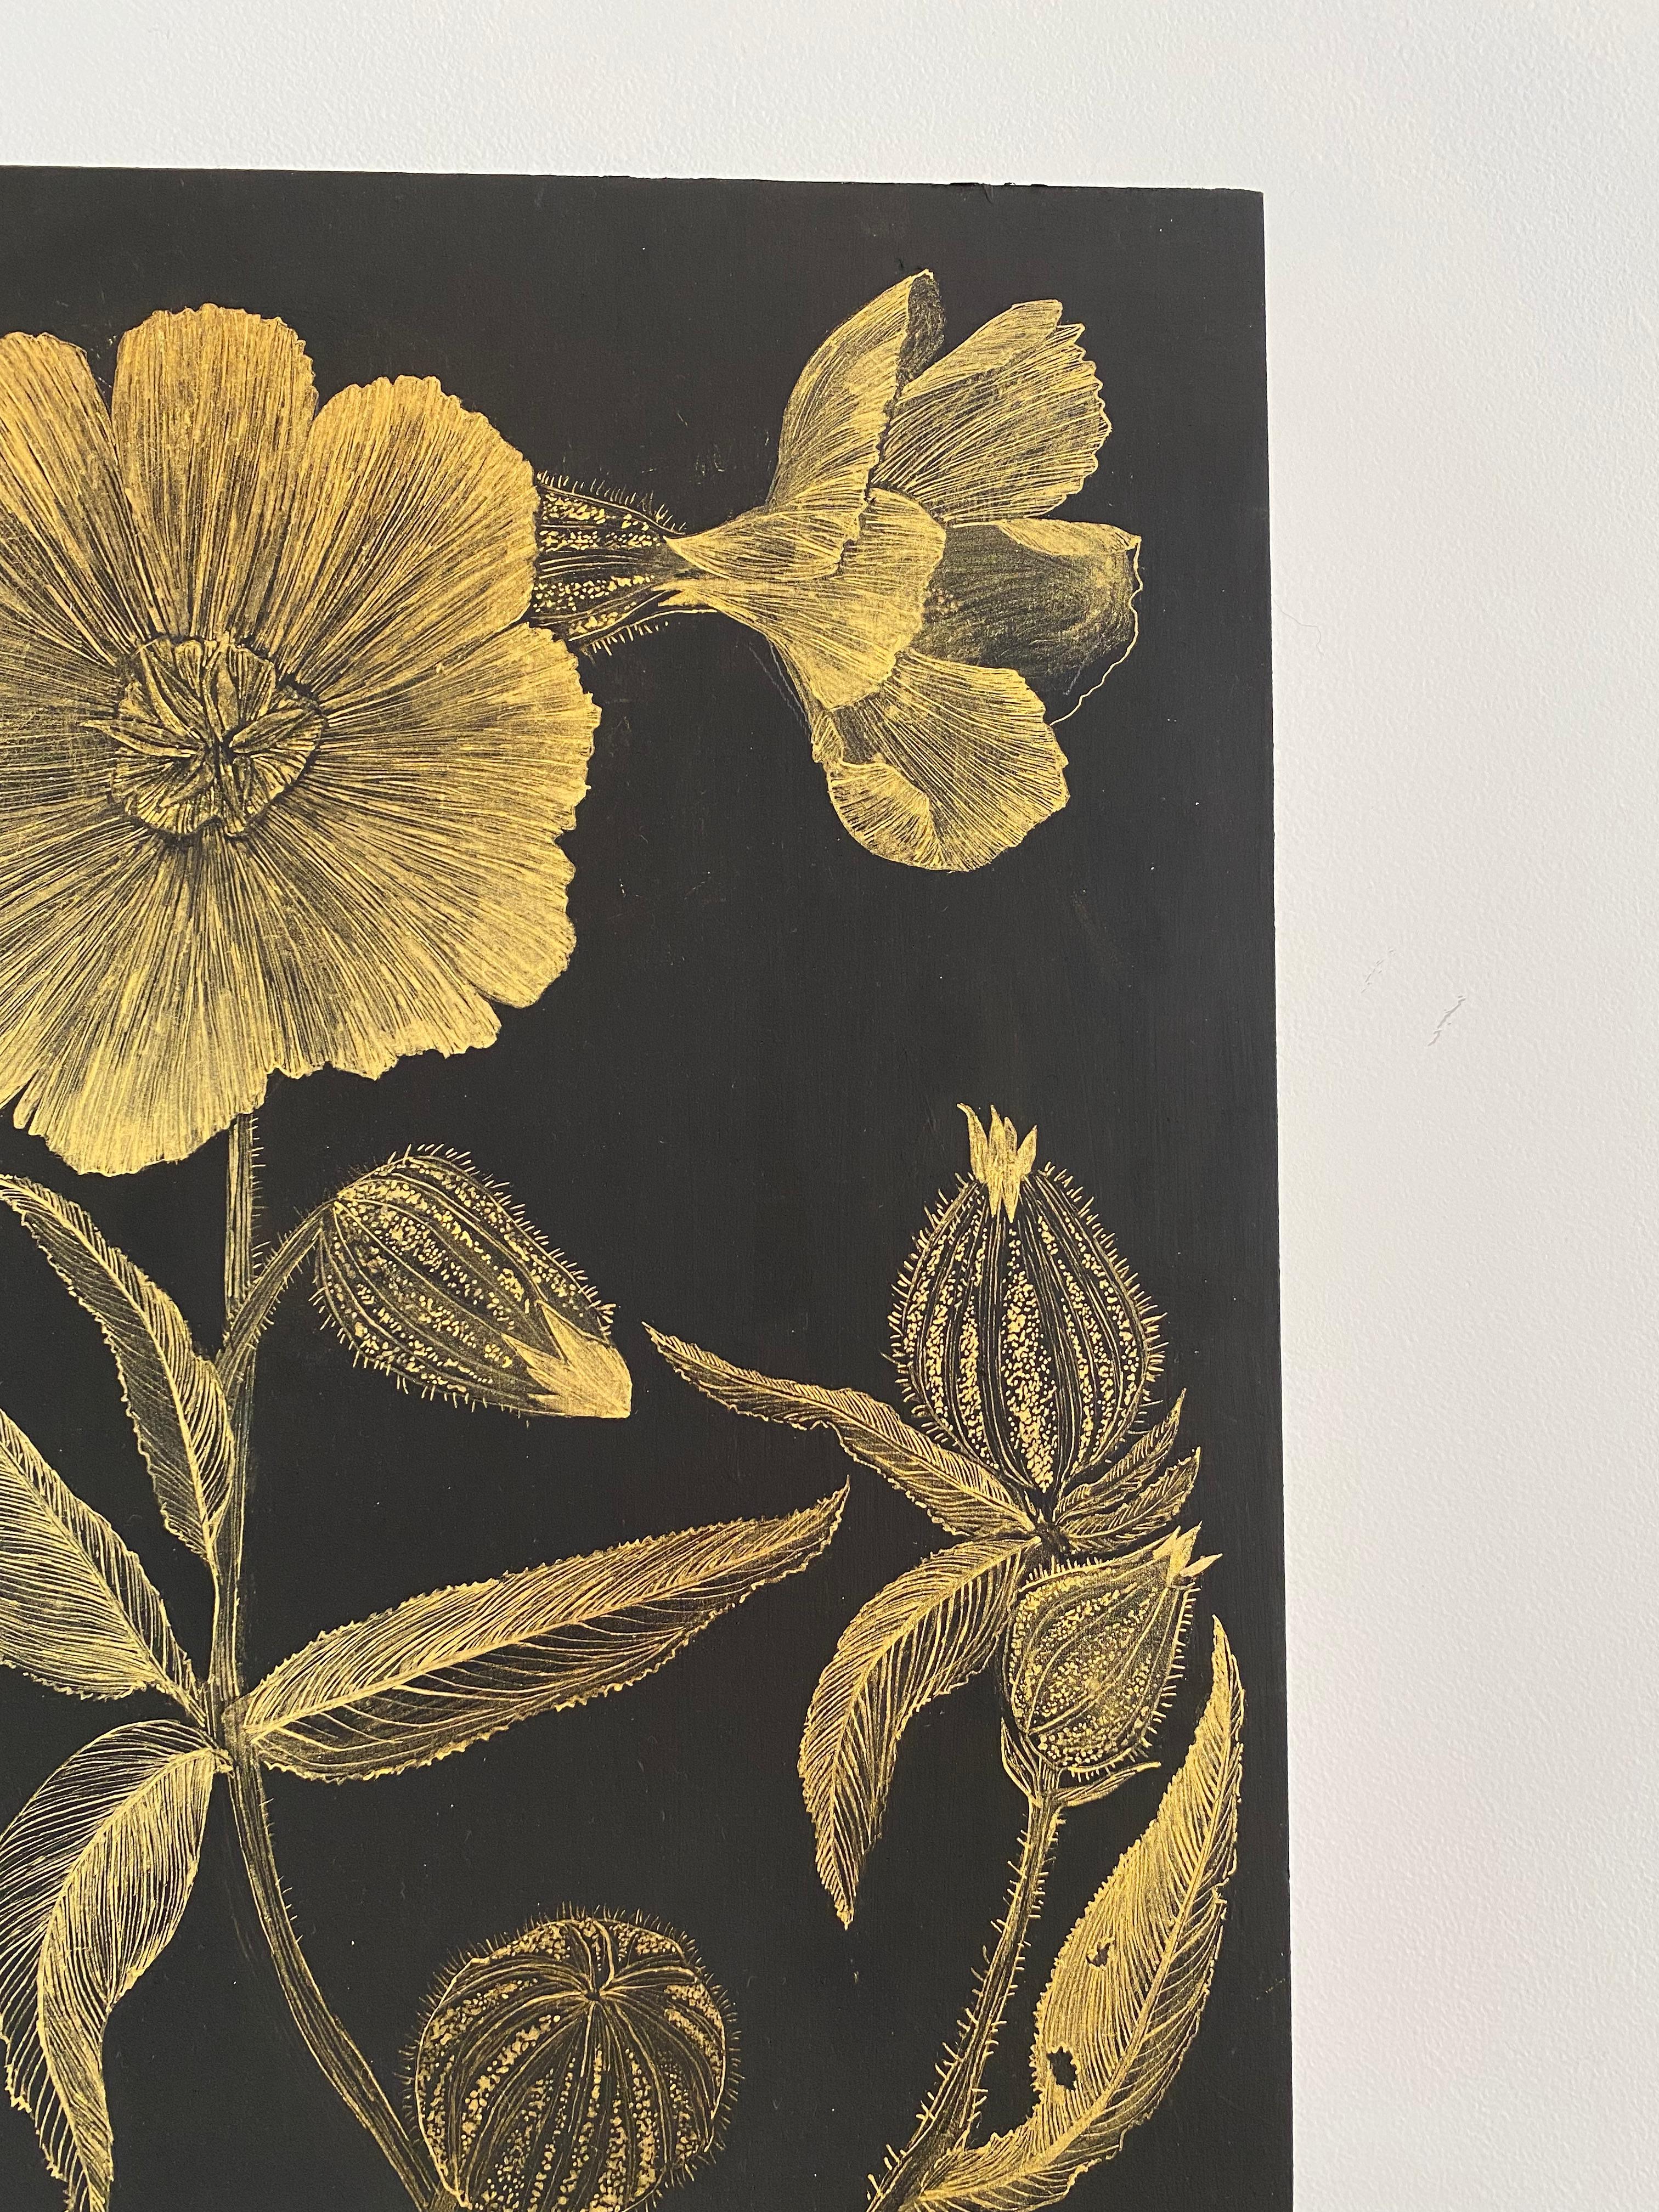 Marshmallow Two, Gold Flowers, Leaves Stem, Metallic Botanical Painting on Black For Sale 10